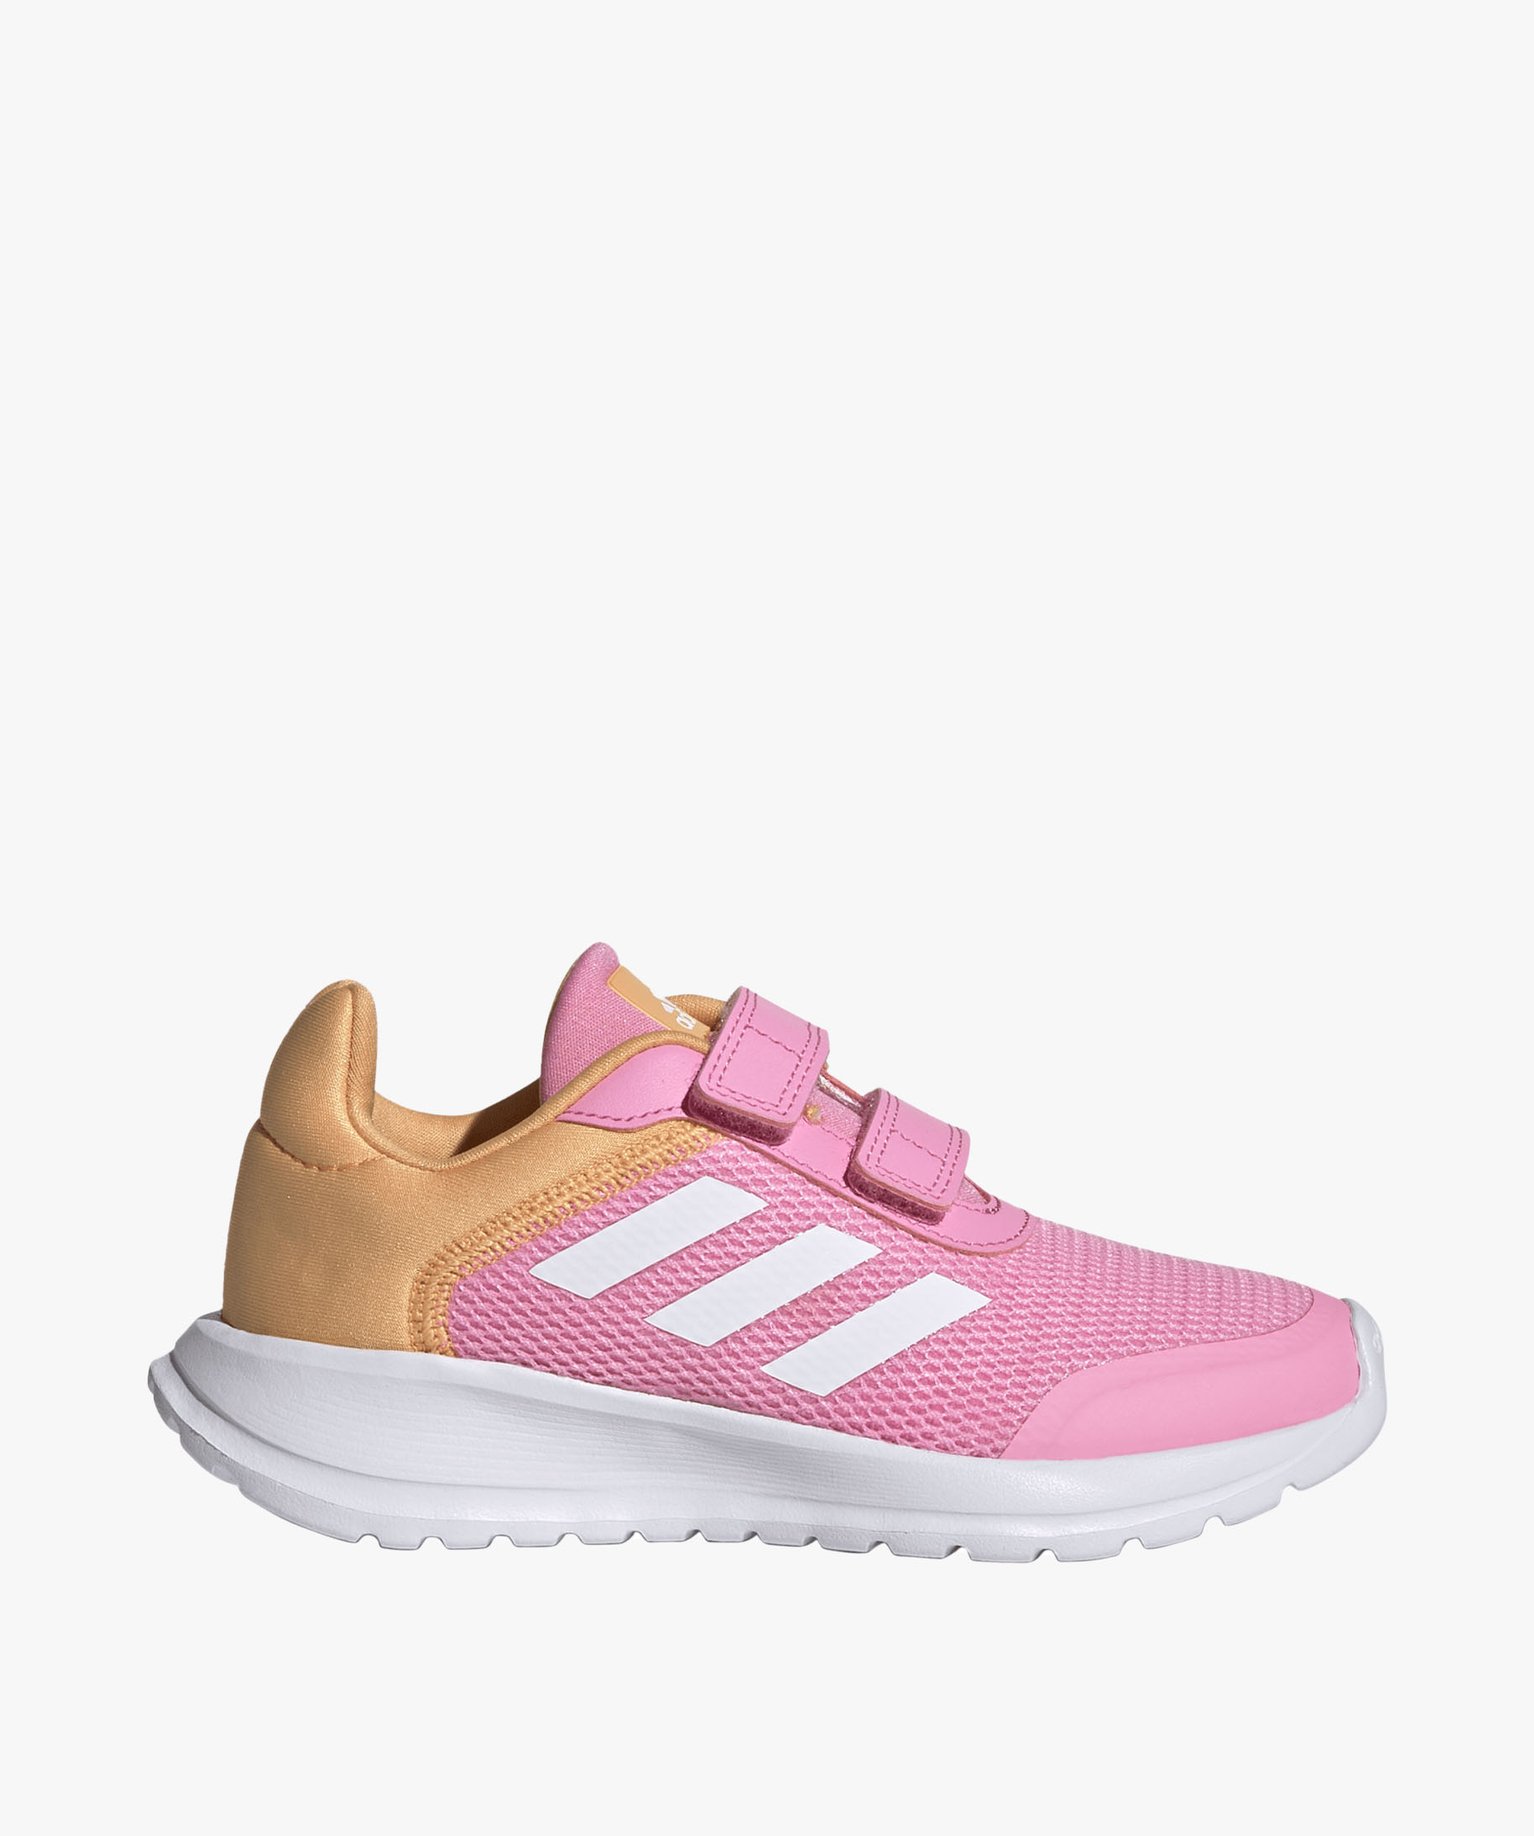 Baskets fille bicolores style running à lacets – Adidas - ADIDAS